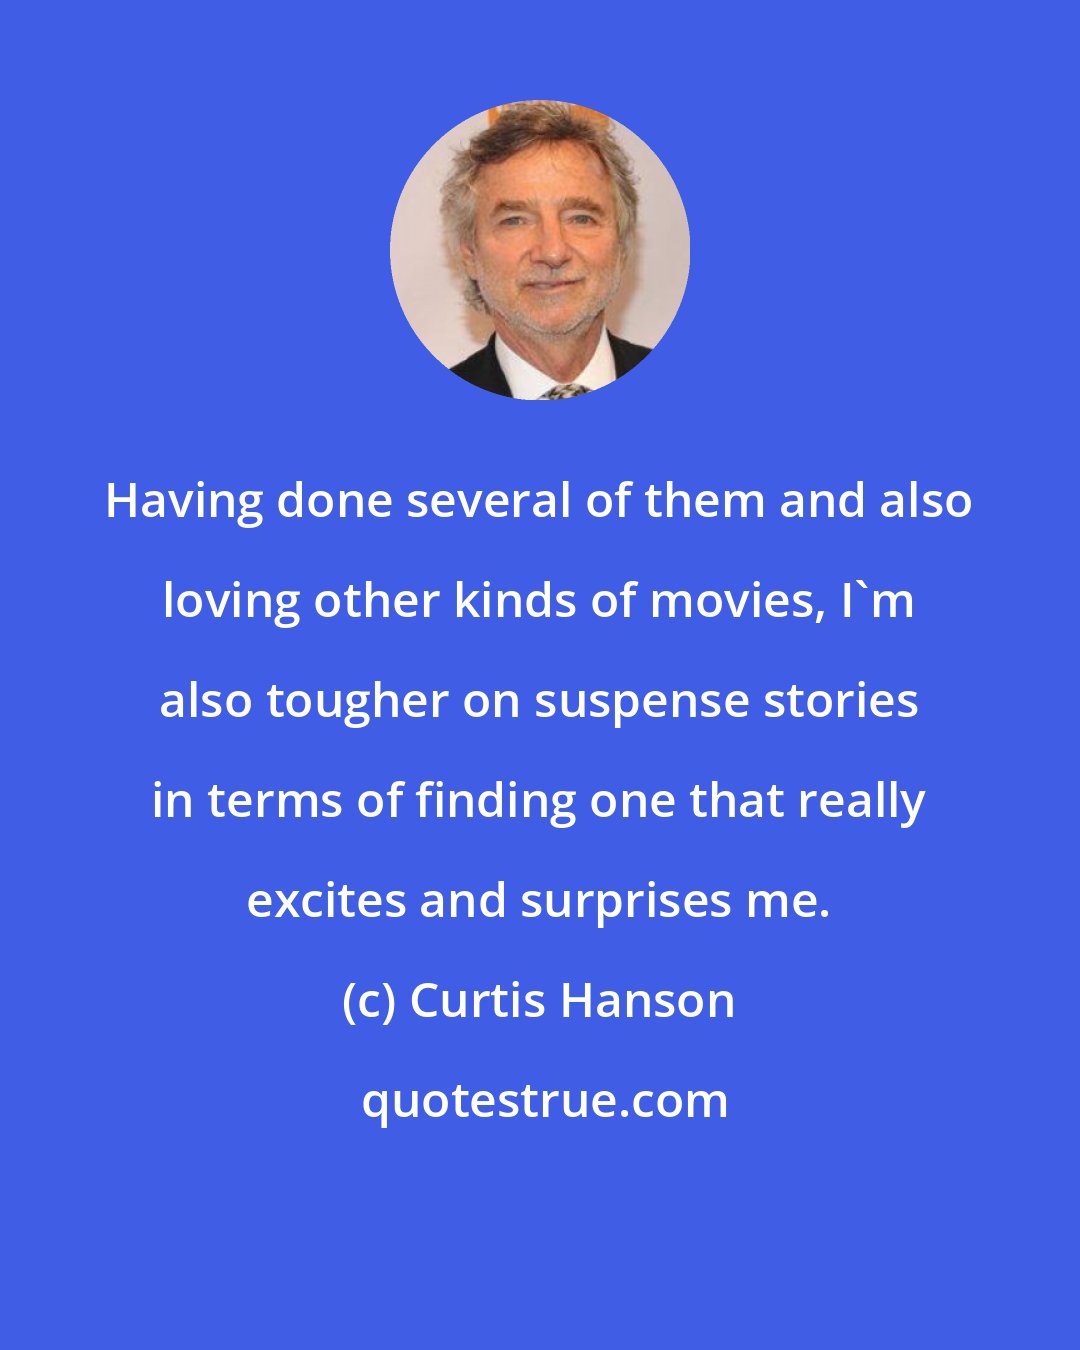 Curtis Hanson: Having done several of them and also loving other kinds of movies, I'm also tougher on suspense stories in terms of finding one that really excites and surprises me.